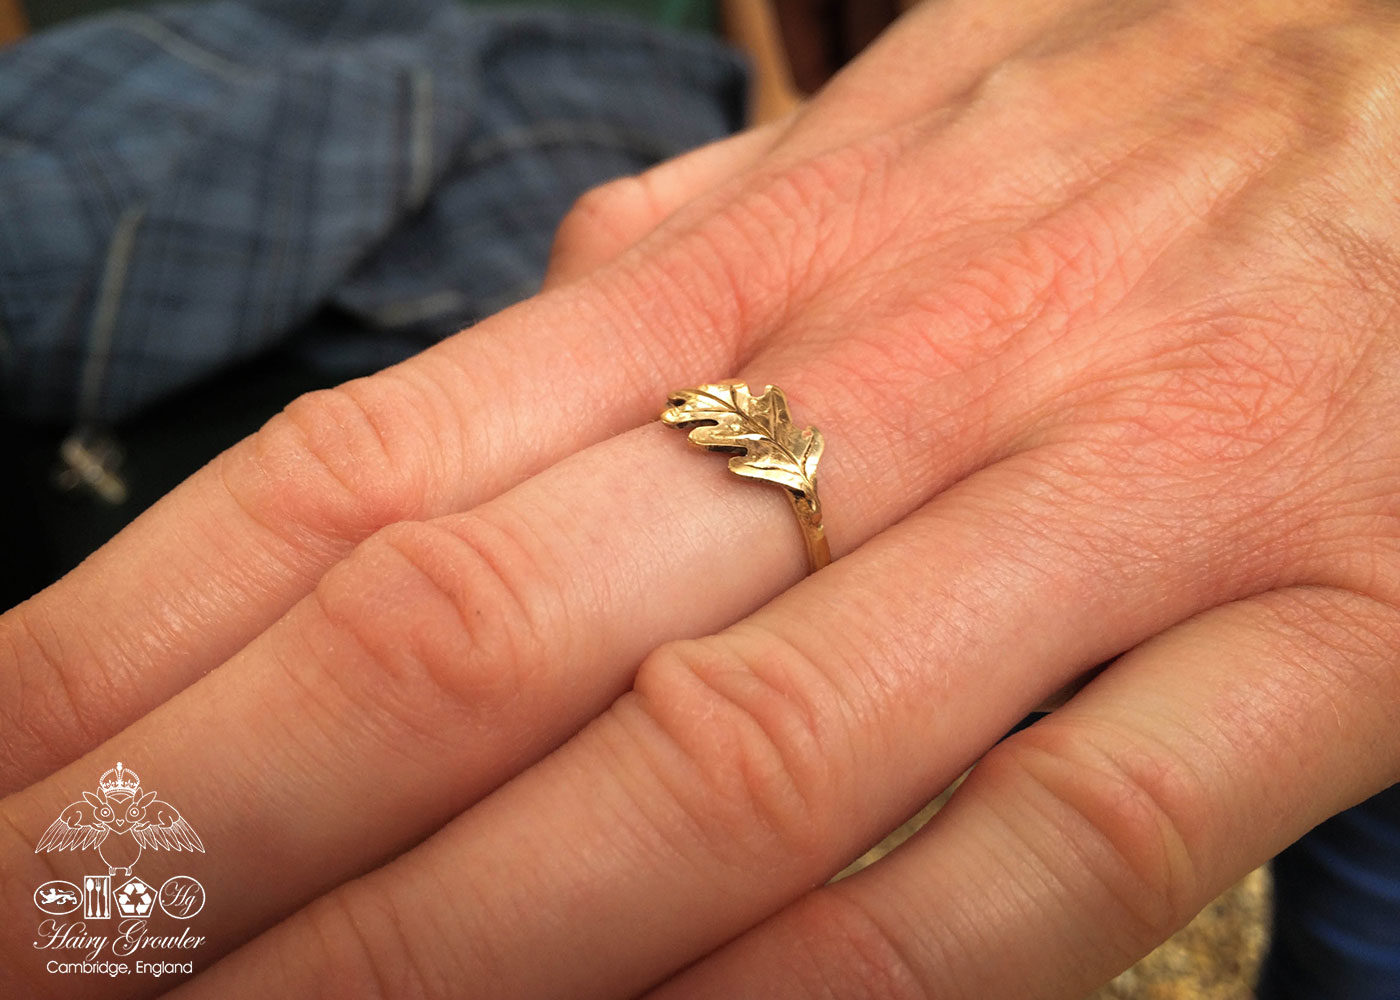 handcrafted and recycled 22ct gold sovereign oak leaf ring. Totally handcrafted and recycled. Unusual and interesting.